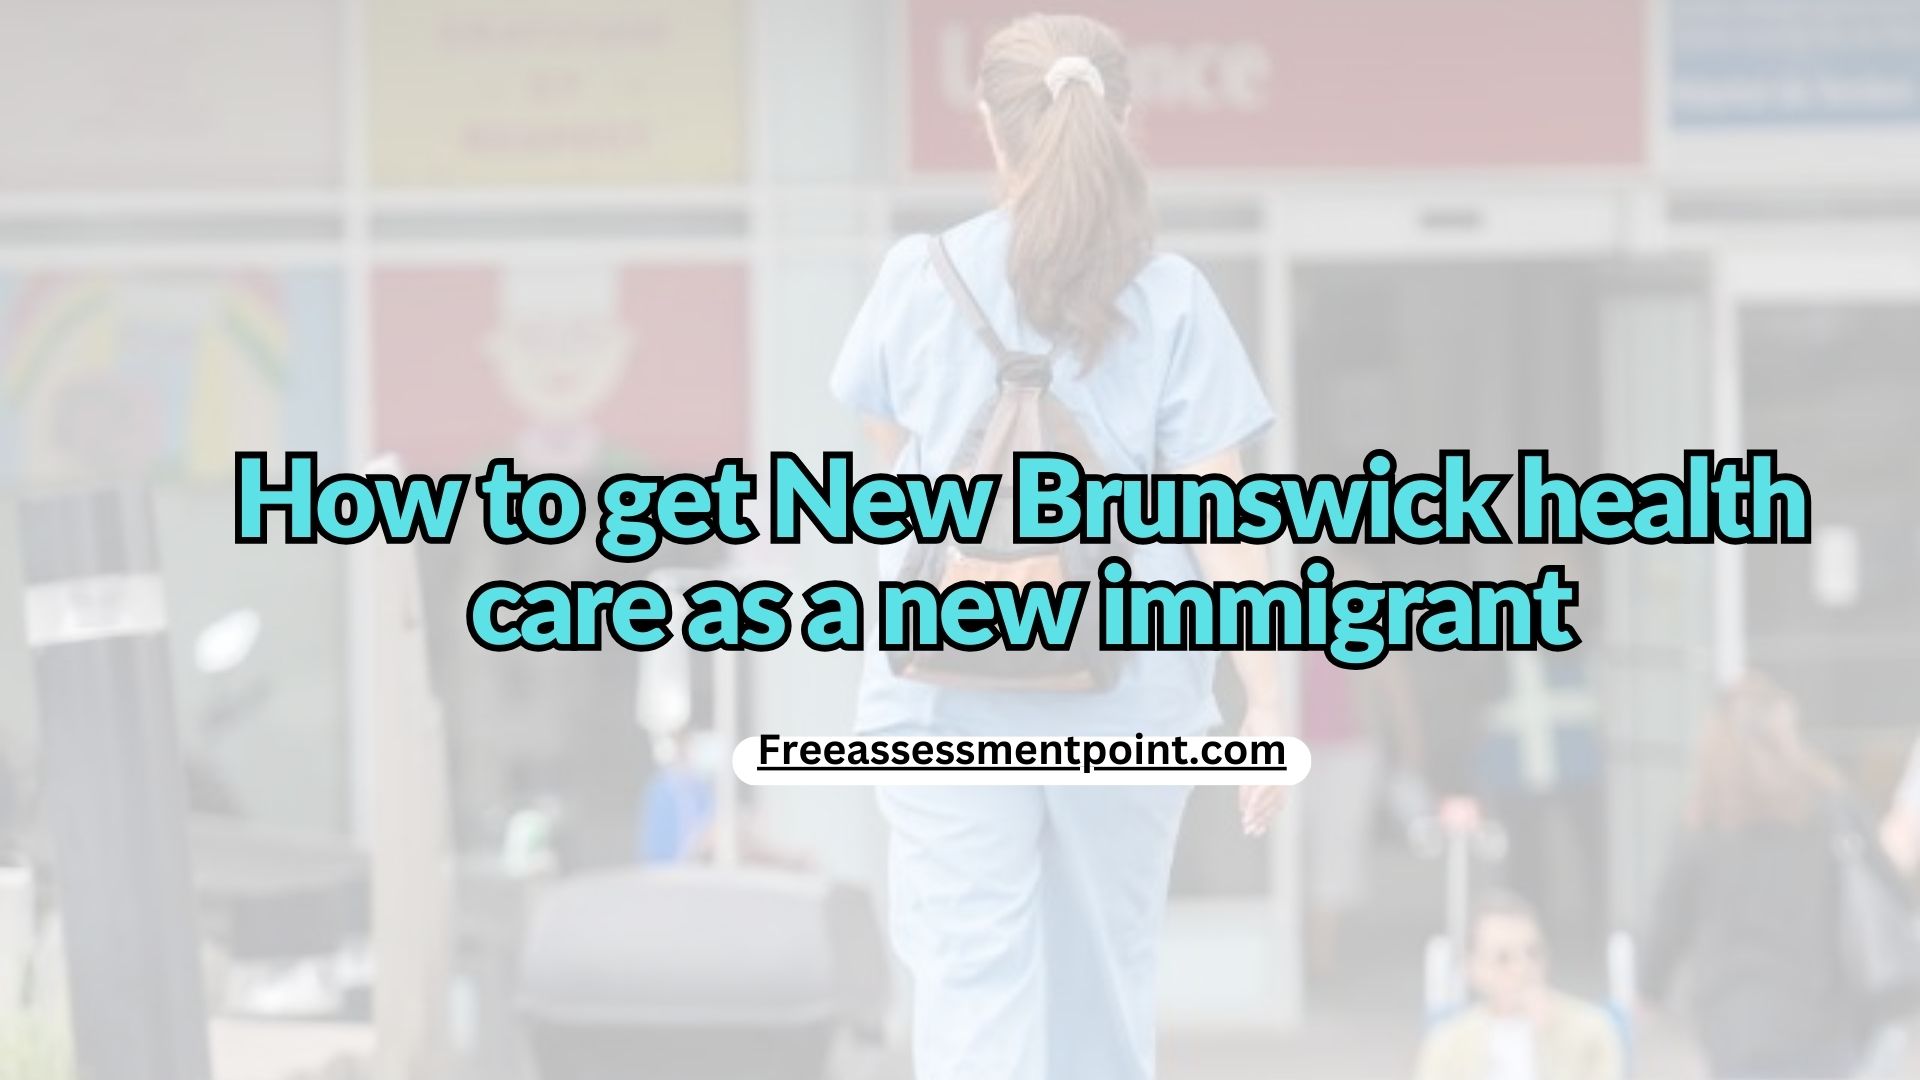 How to get New Brunswick health care as a new immigrant